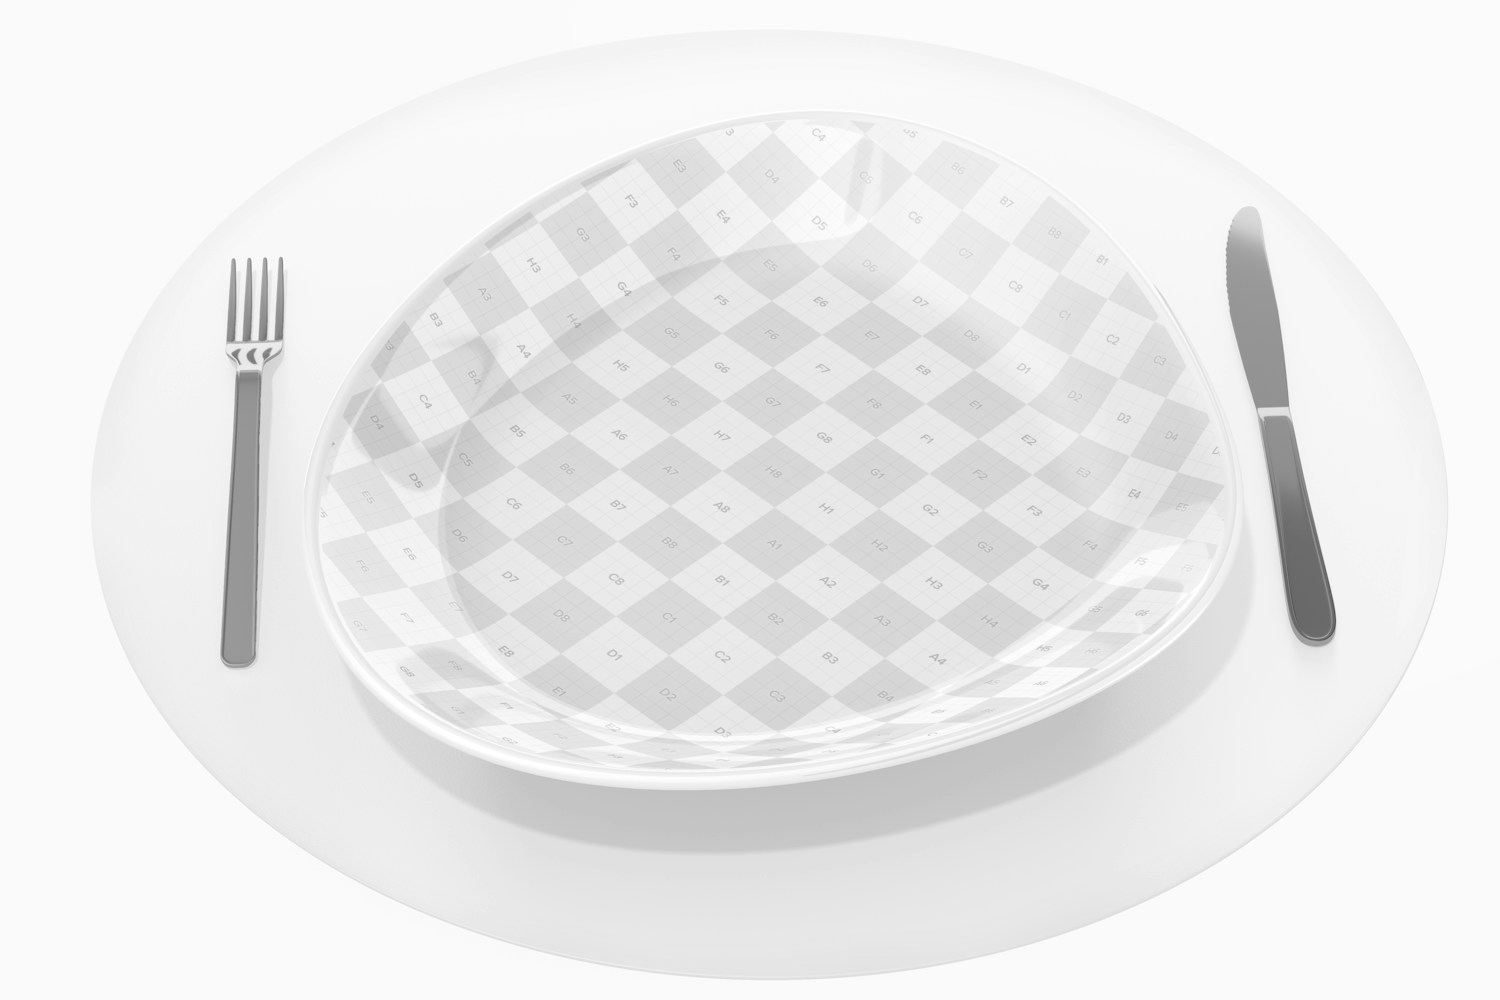 Ceramic Luxury Plate Mockup, with Fork and Knife